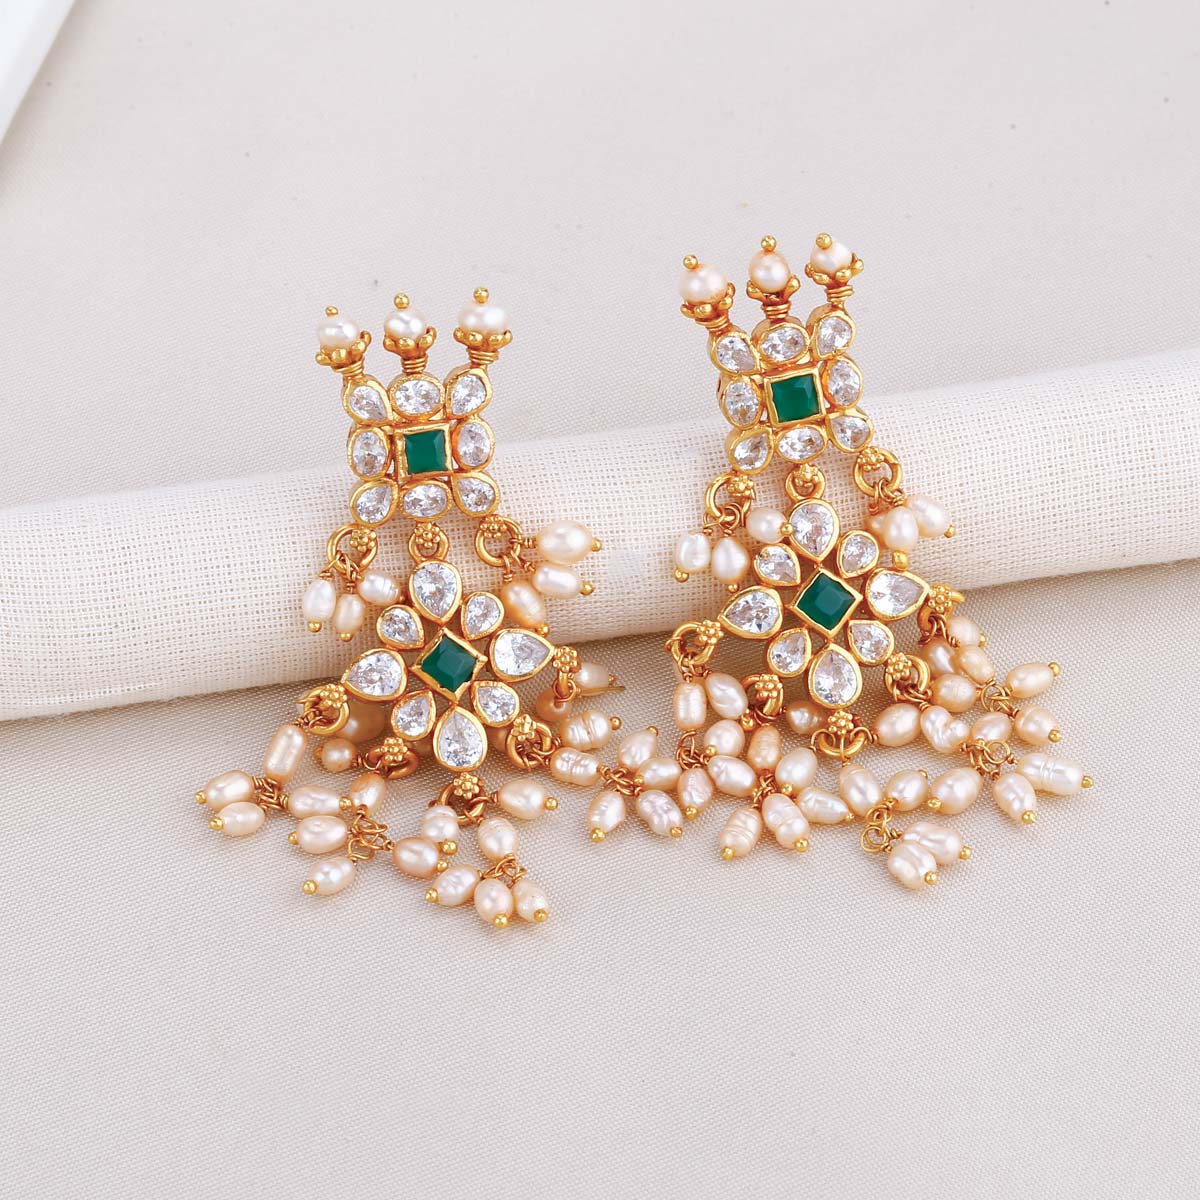 1 Gram Gold Stone Earrings - South India Jewels